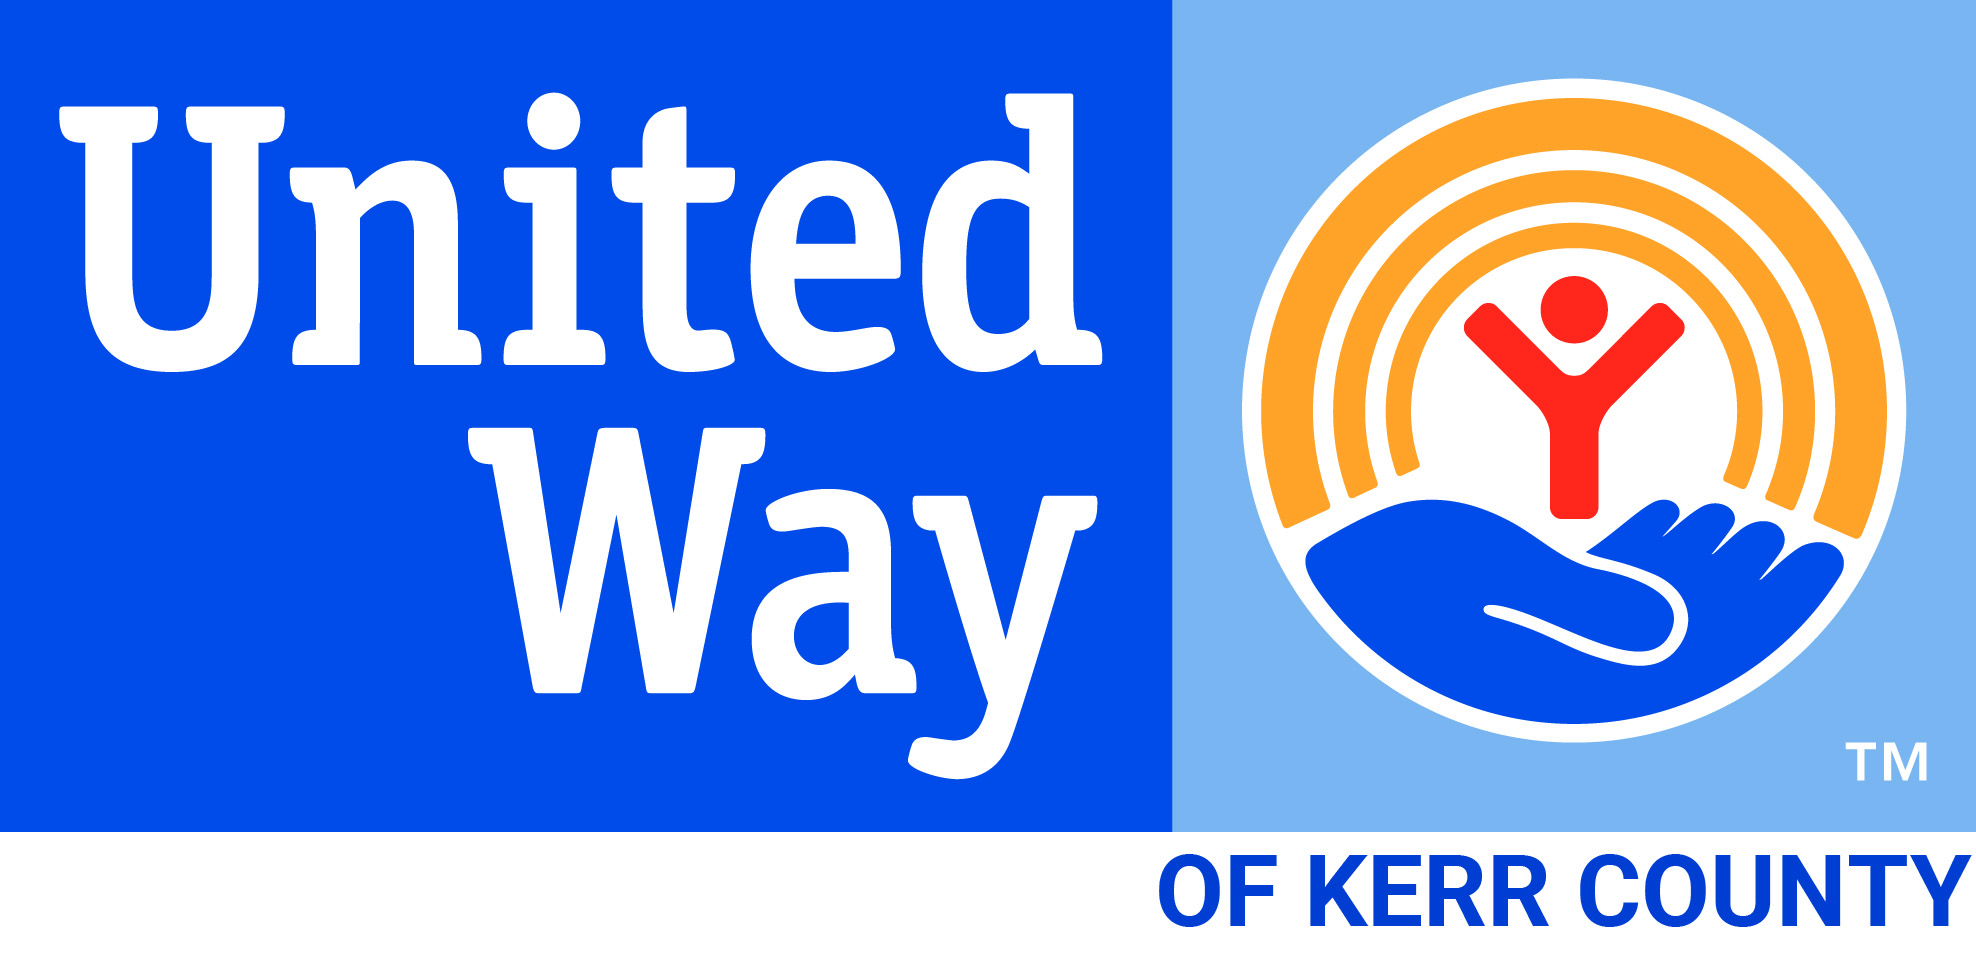 United Way of Kerr County